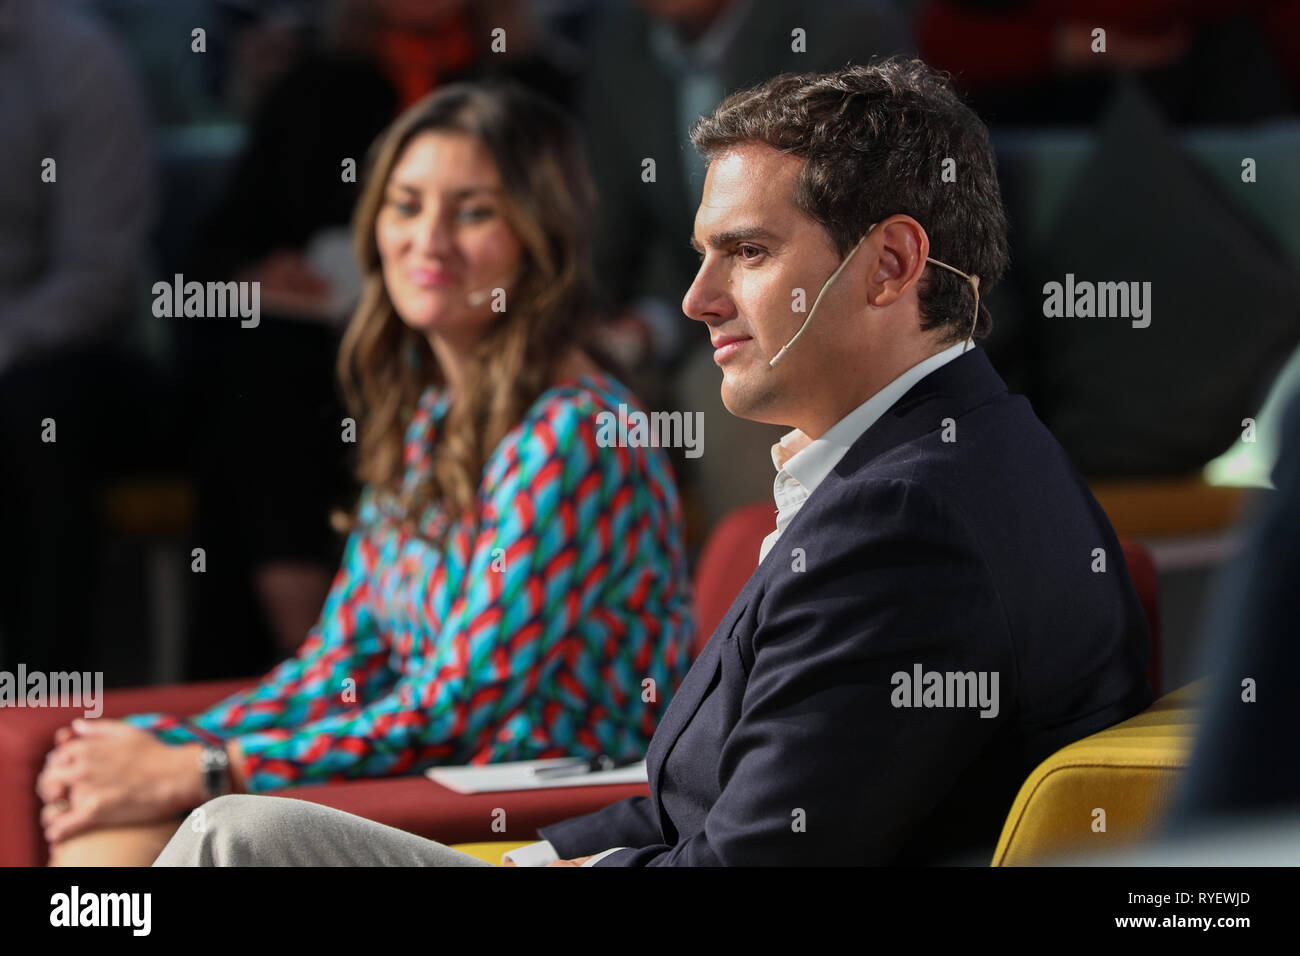 Sara Jimenez (L) and Albert Rivera (R) are seen attending the debate on discrimination that exists in Spain. Stock Photo